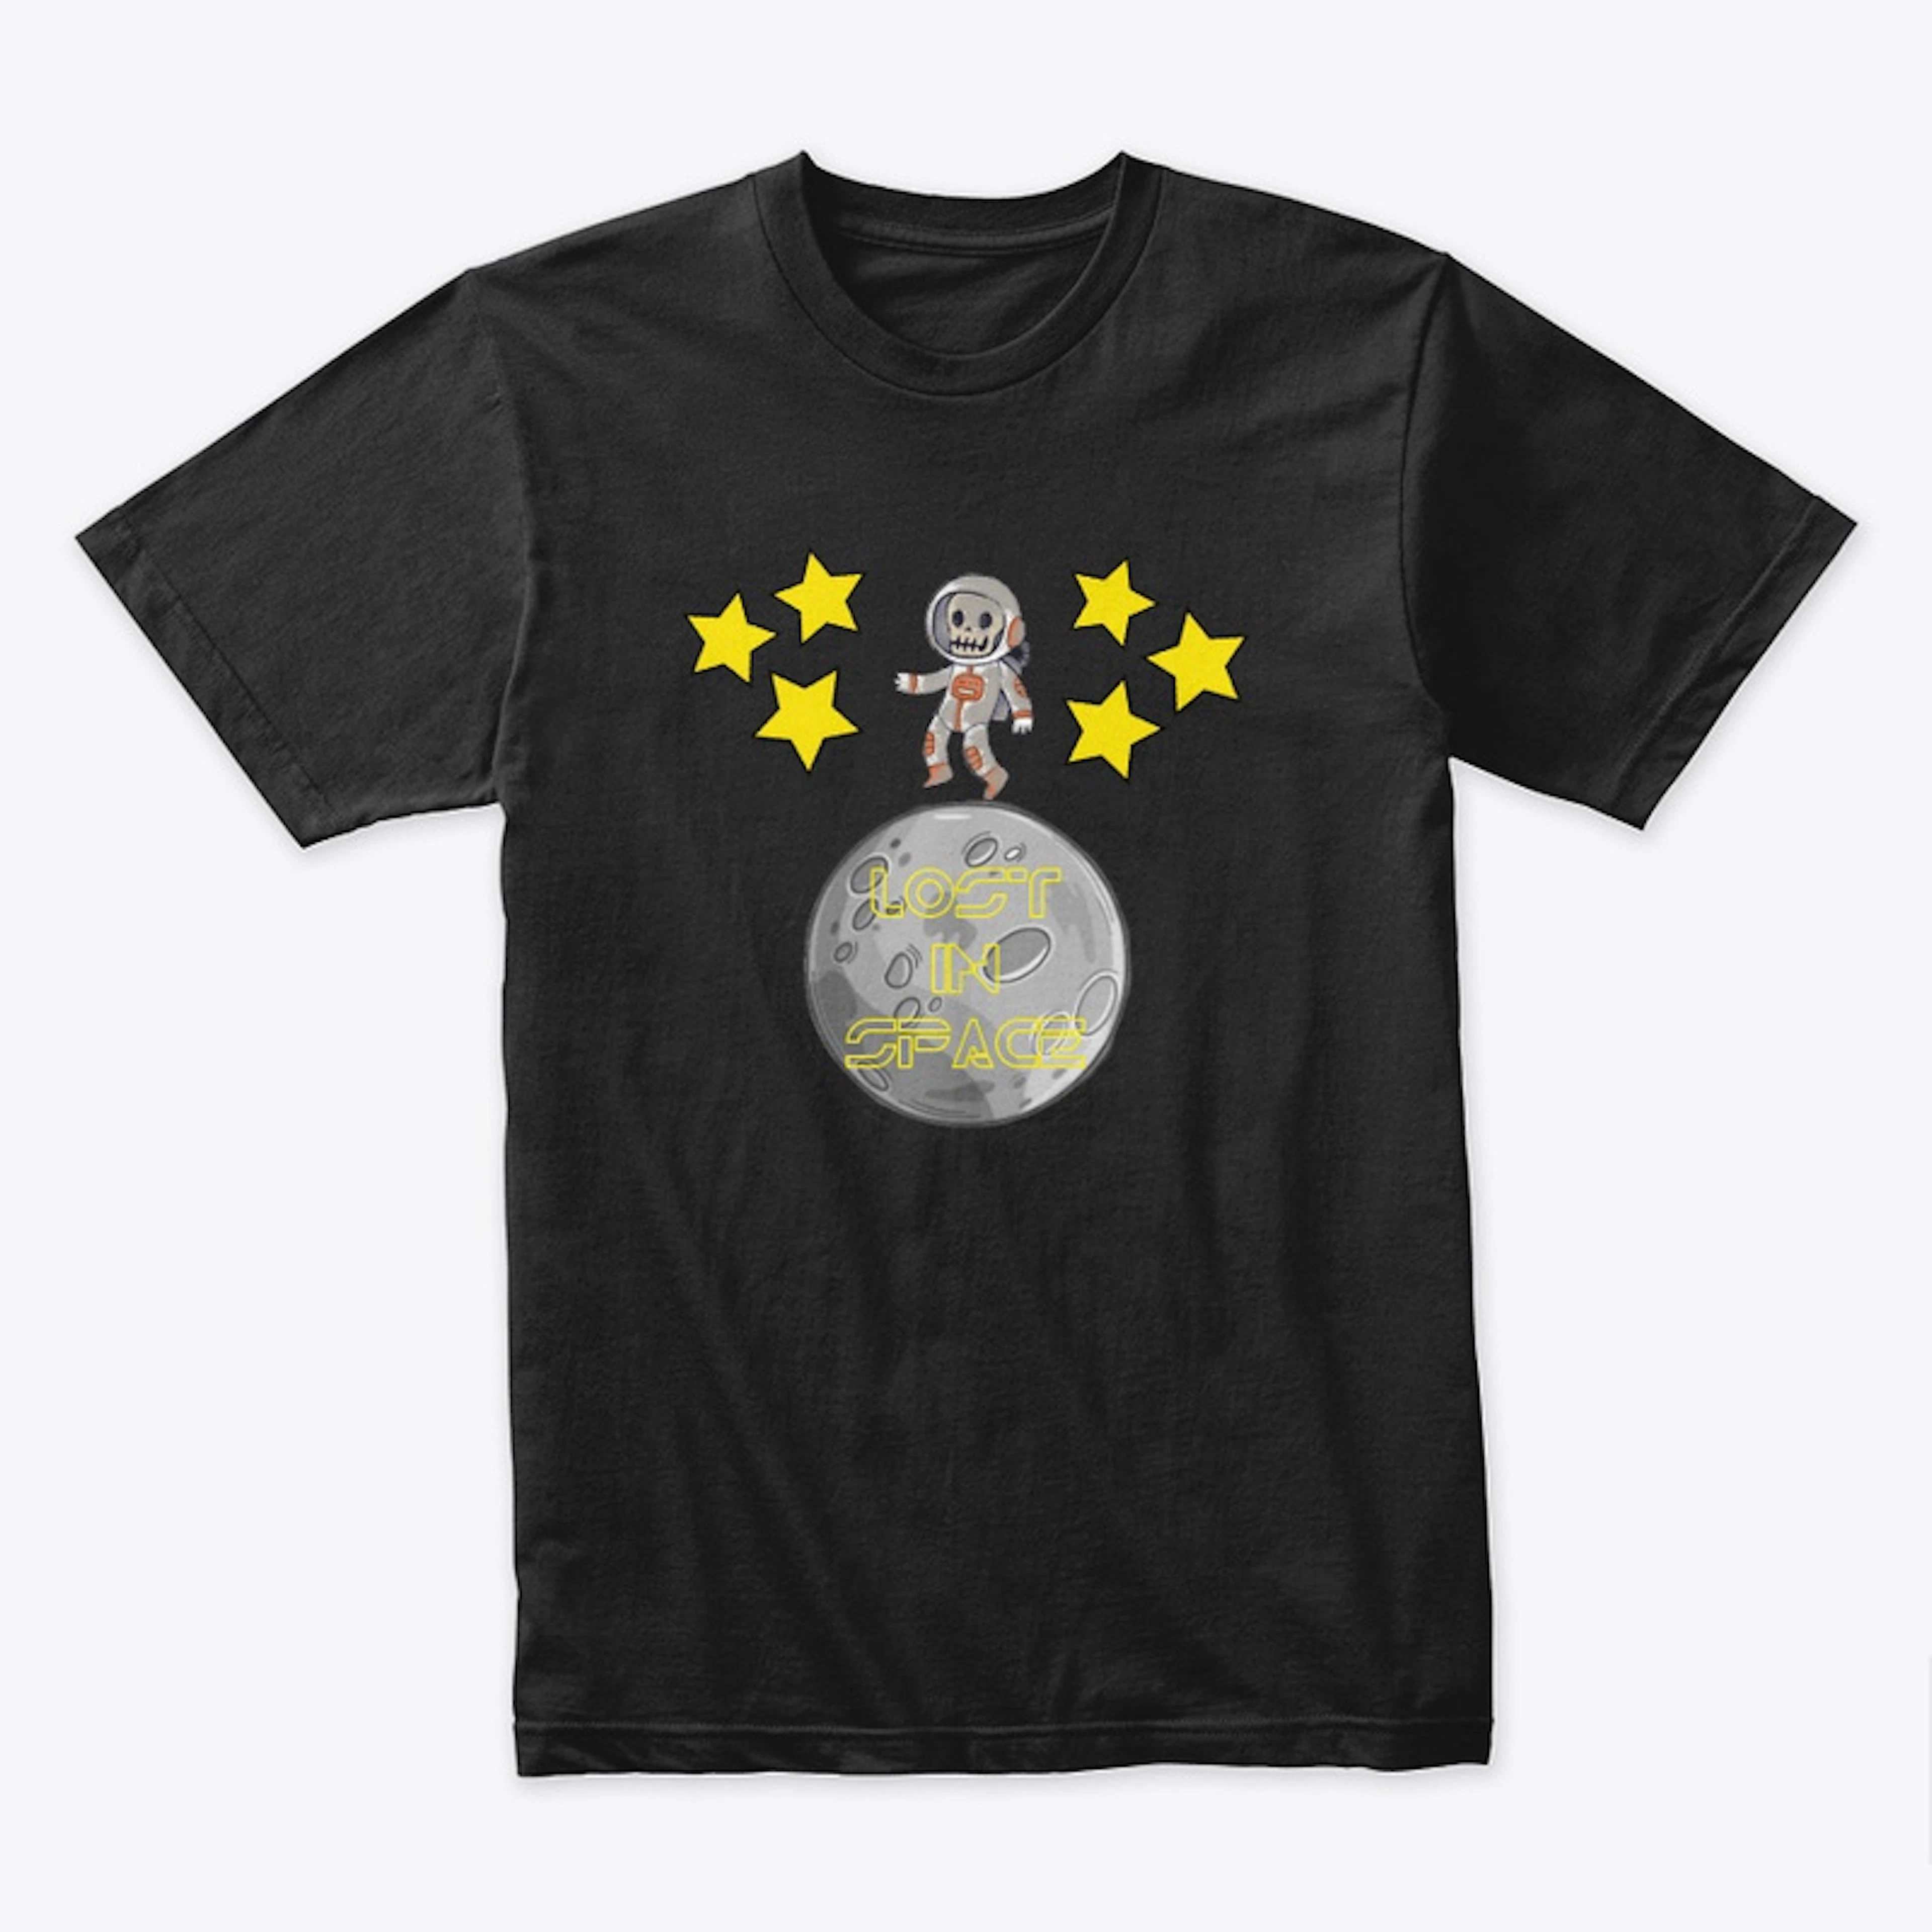 "LOST IN SPACE" Design.